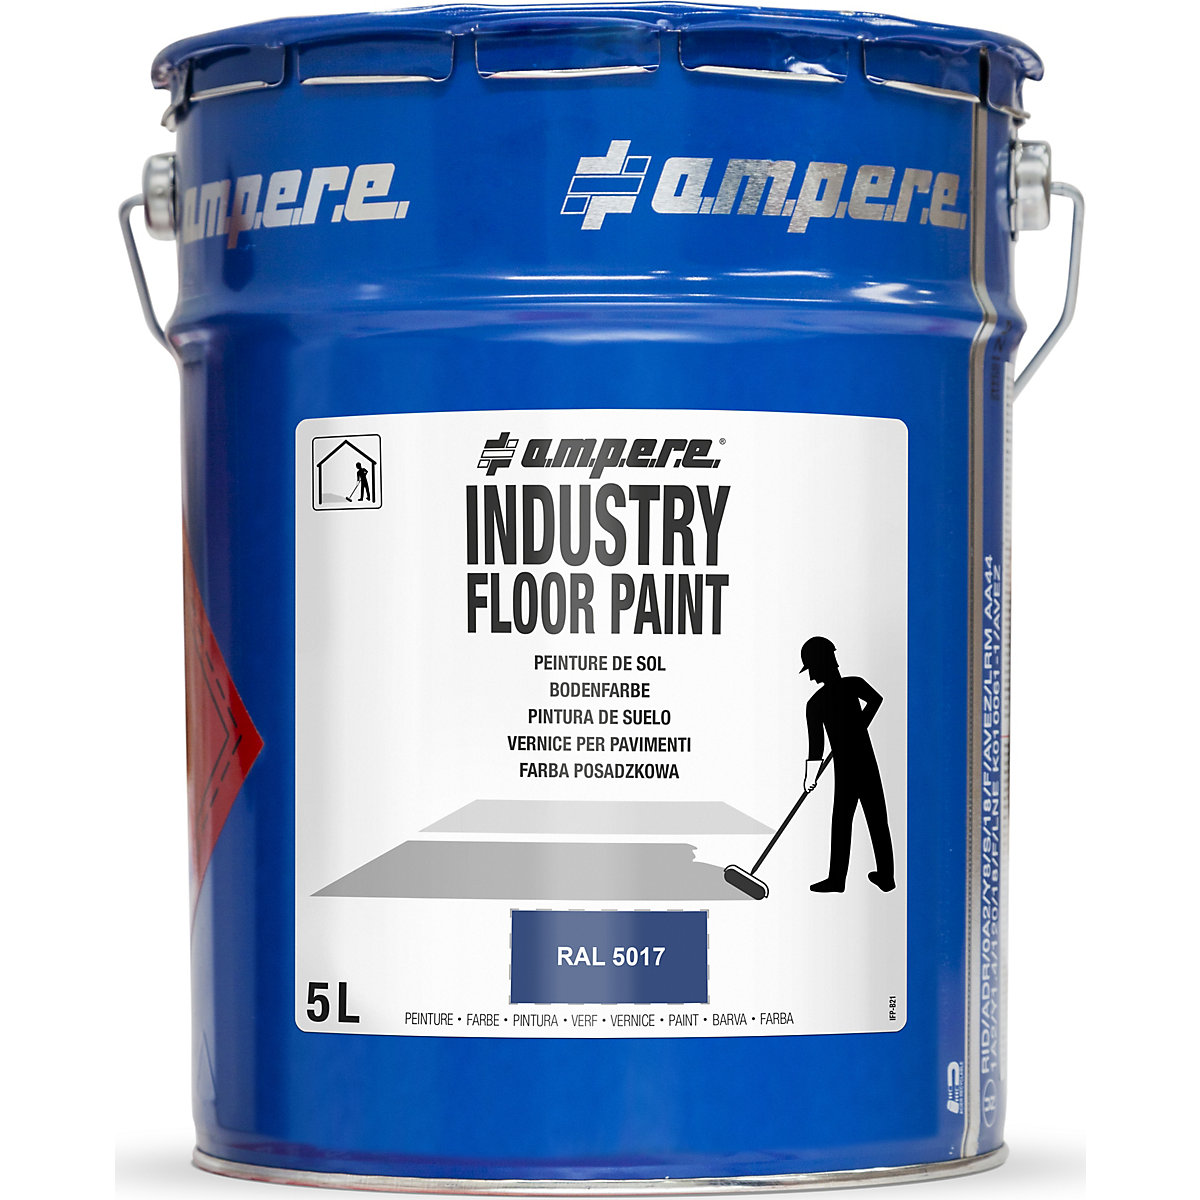 Industry Floor Paint® ground marking paint – Ampere, capacity 5 l, blue-5